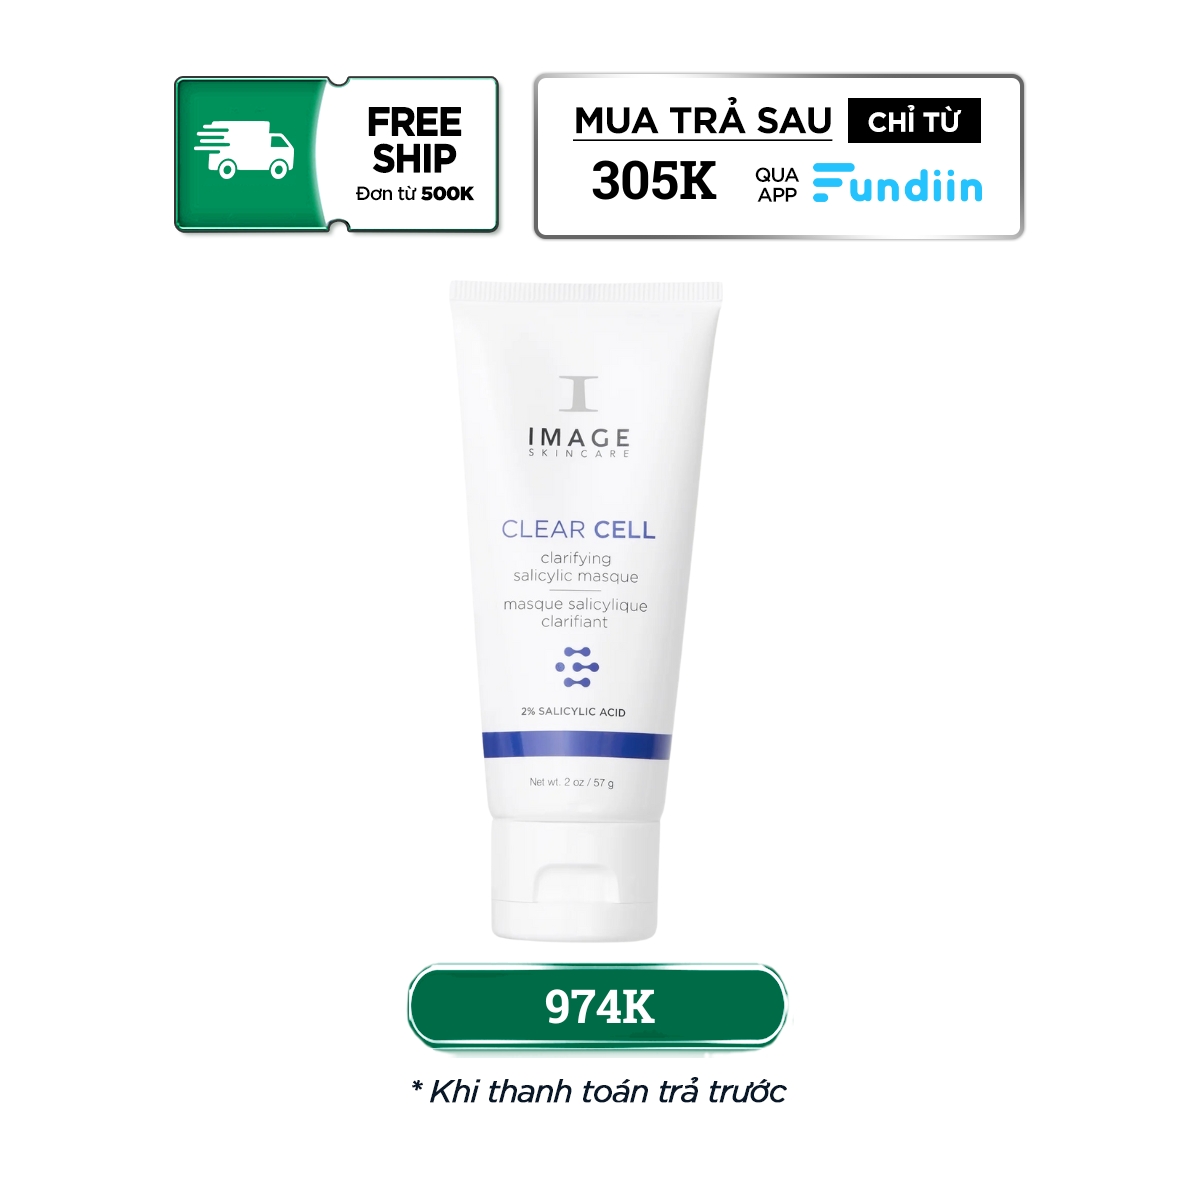 Mặt nạ làm giảm mụn Image Clear Cell Medicated Acne Masque